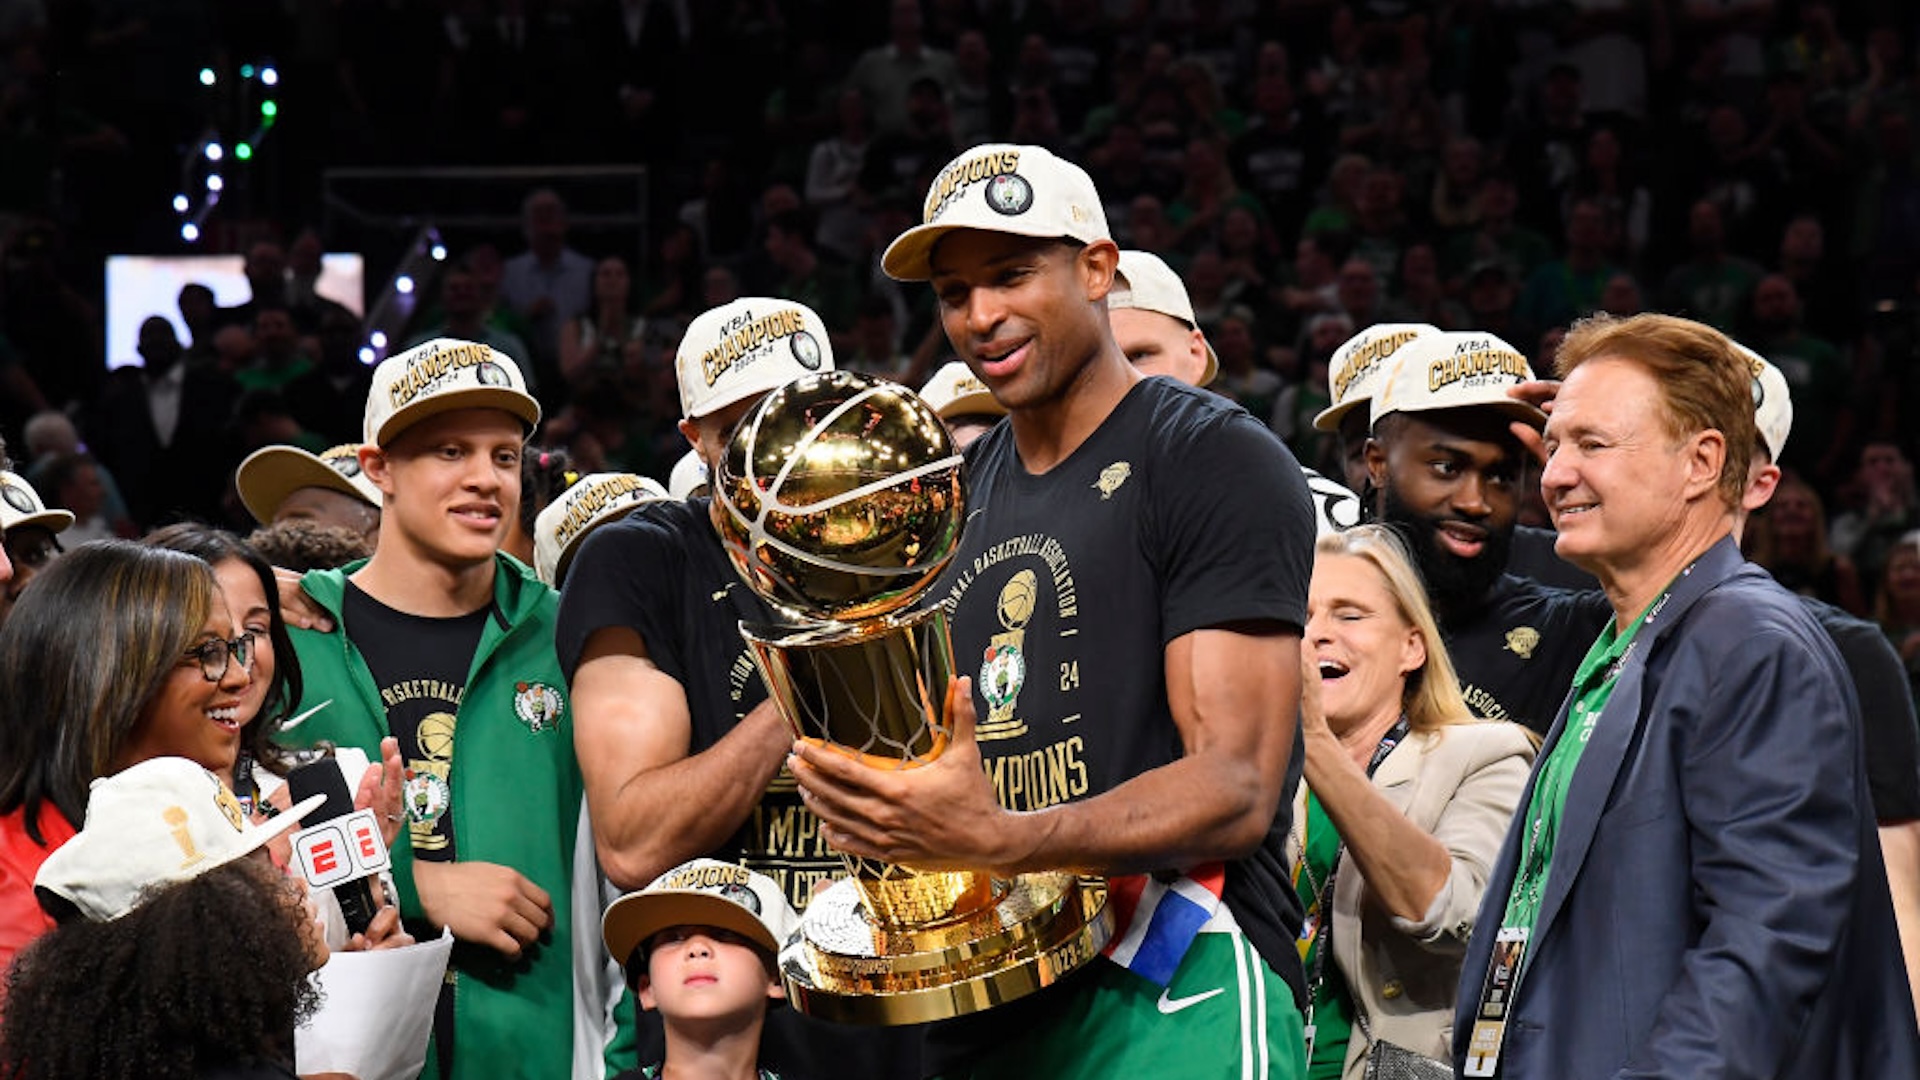 Al Horford #42 of the Boston Celtics of the Boston Celtics celebrates with the Larry O'Brien Trophy after the game against the Dallas Mavericks during Game 5 of the 2024 NBA Finals on June 17, 2024 at the TD Garden in Boston, Massachusetts.